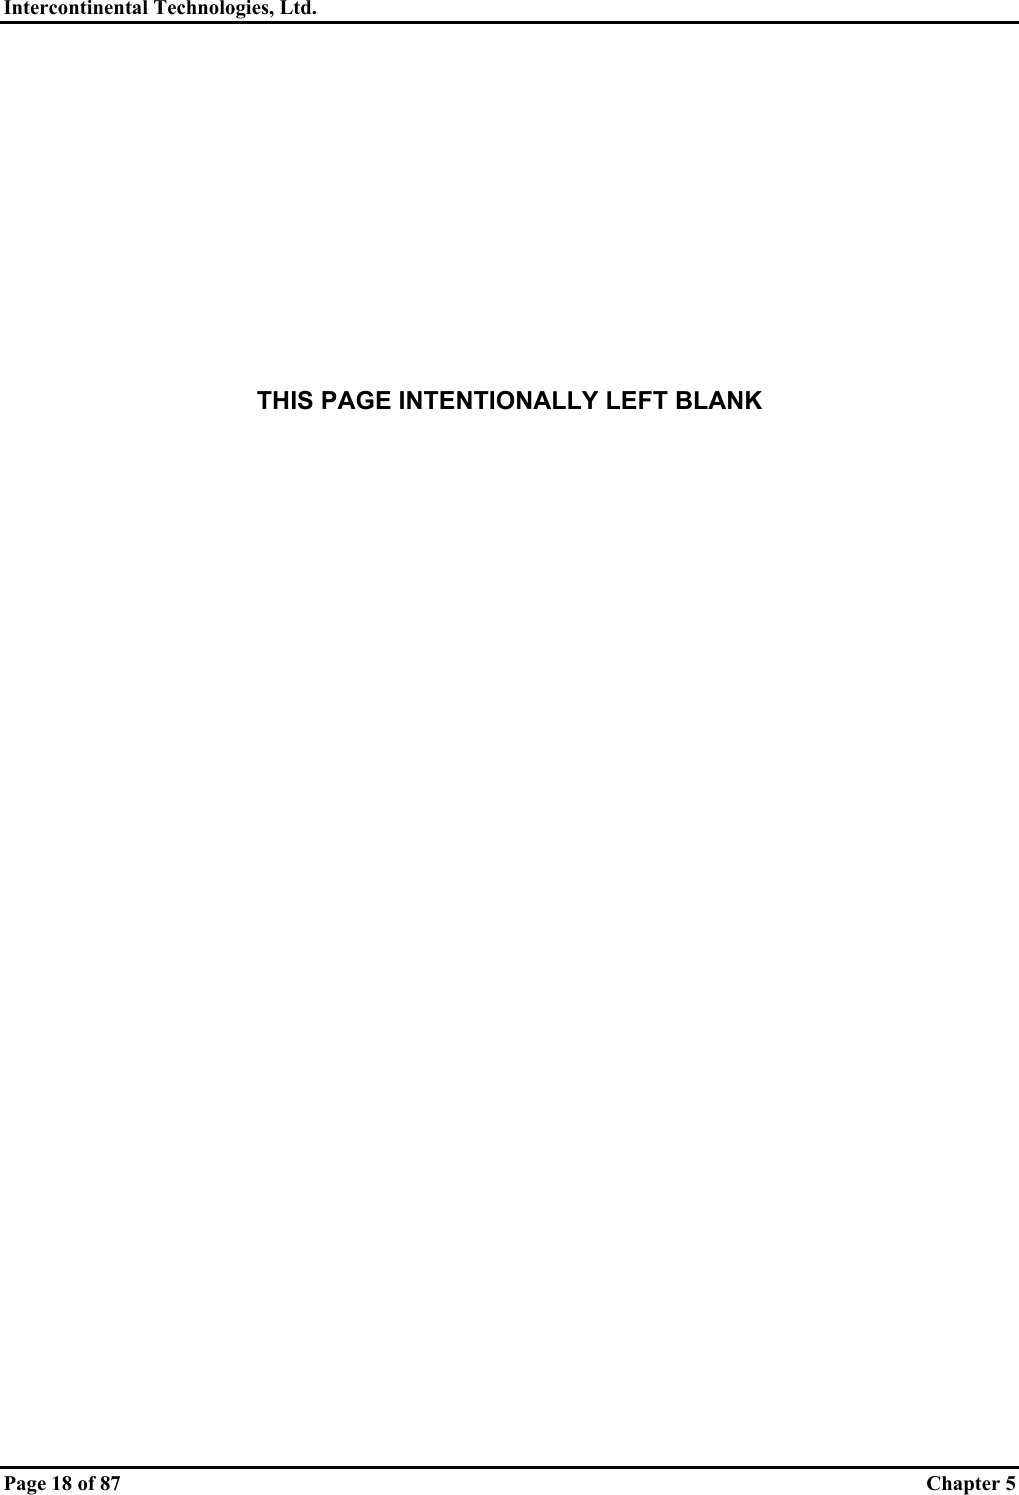 Intercontinental Technologies, Ltd.   Page 18 of 87  Chapter 5            THIS PAGE INTENTIONALLY LEFT BLANK    